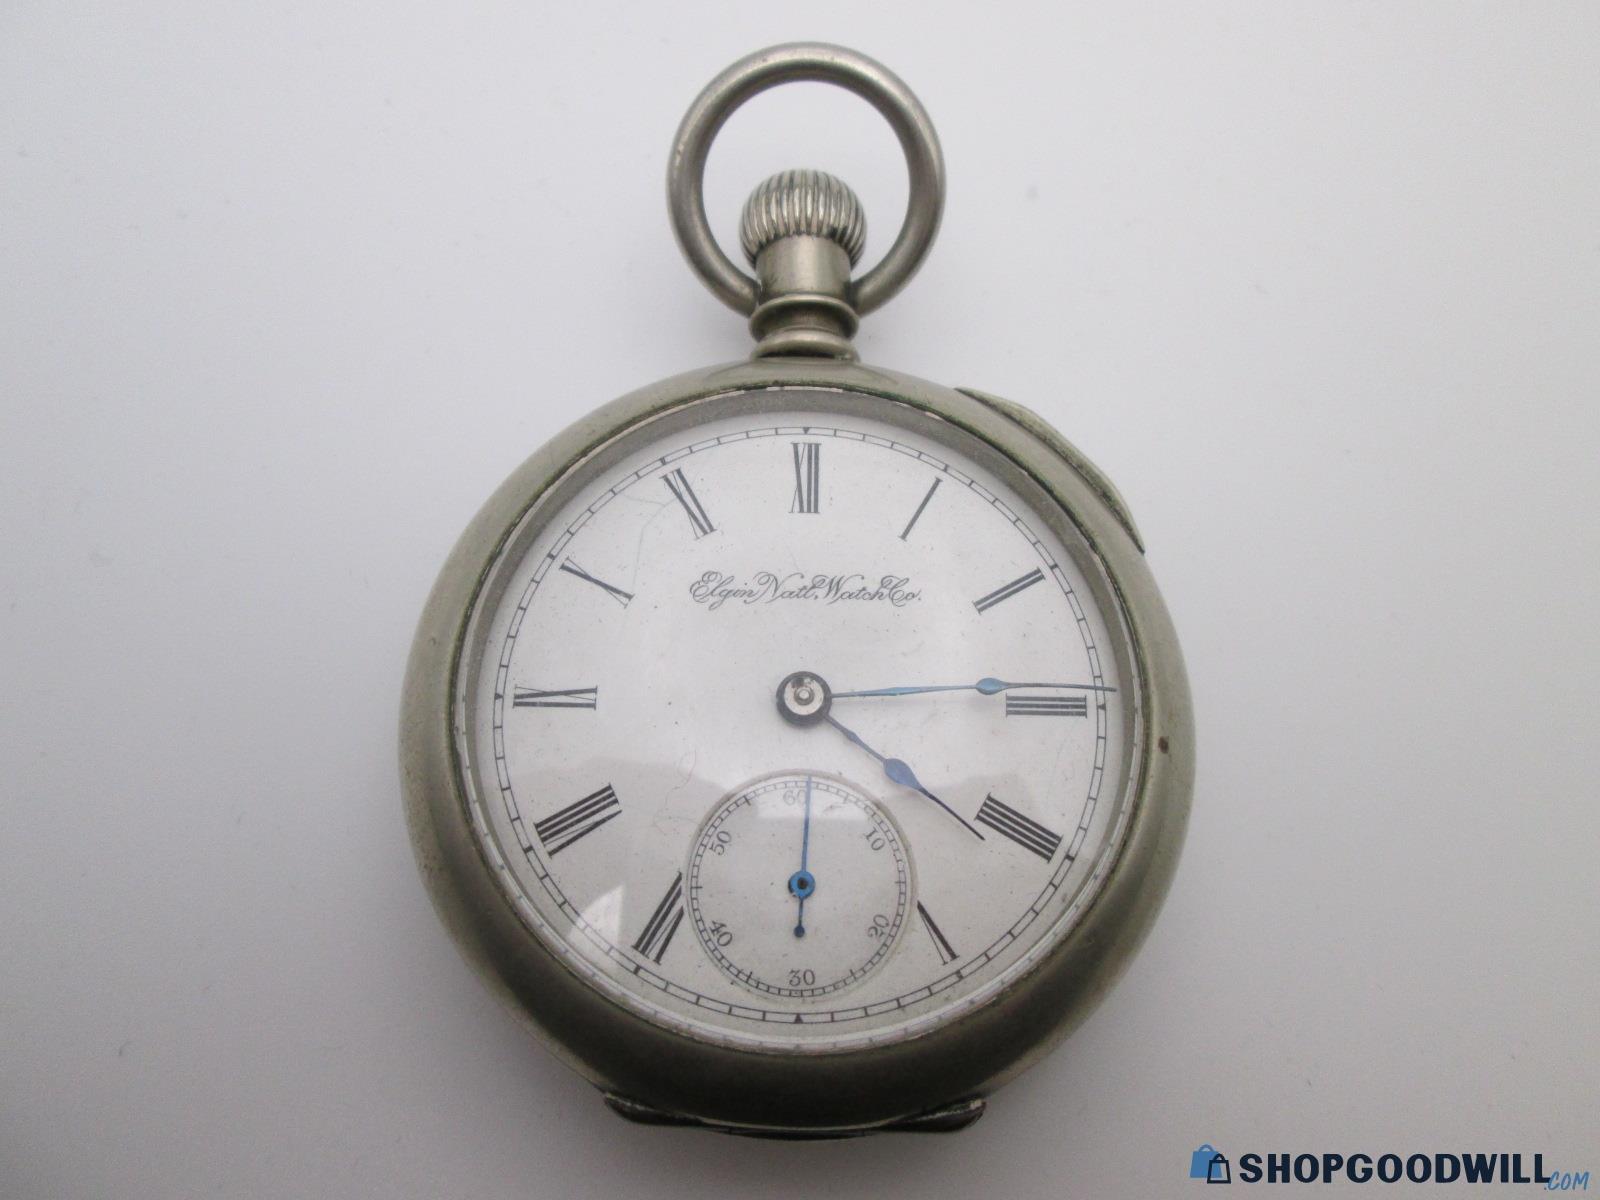 Vintage Elgin National Watch Co. Silveroid Pocket Watch Untested ...